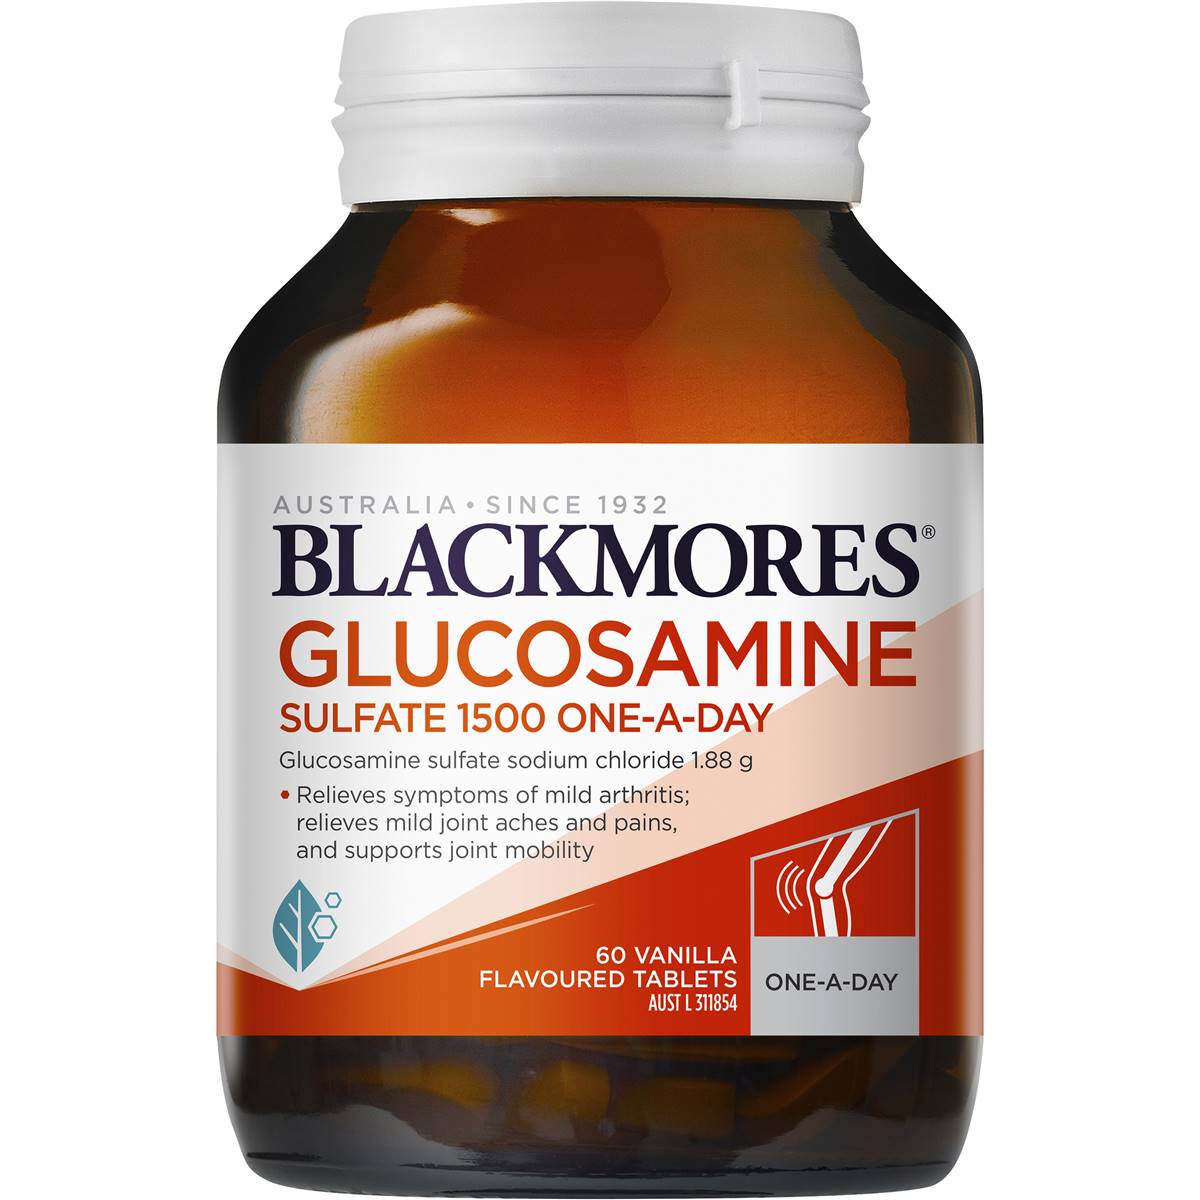 Blackmores Glucosamine Sulfate 1500mg One-A-Day 60 Tablets